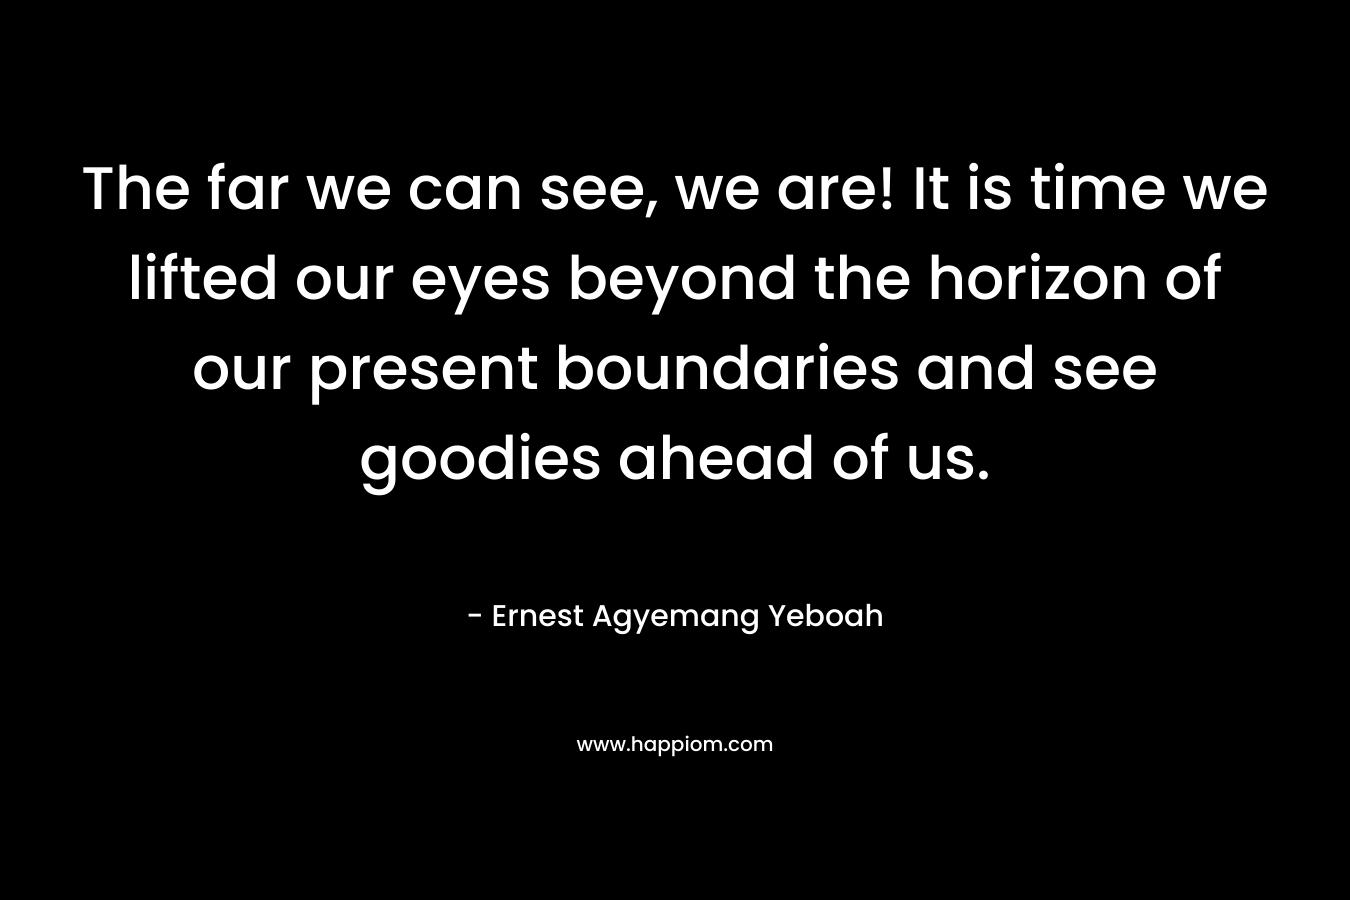 The far we can see, we are! It is time we lifted our eyes beyond the horizon of our present boundaries and see goodies ahead of us. – Ernest Agyemang Yeboah